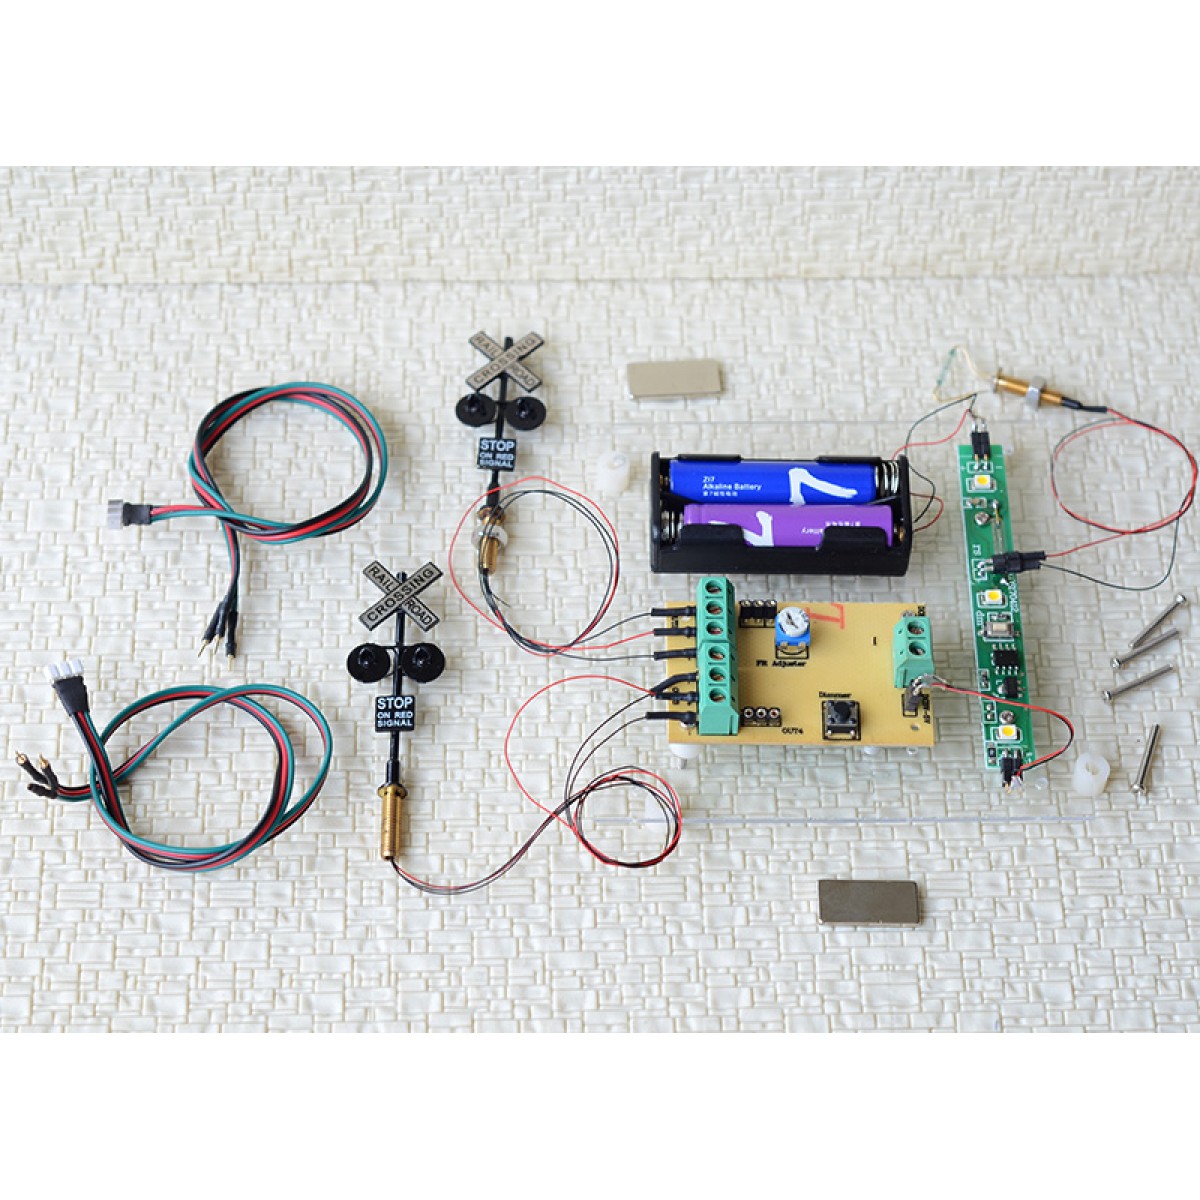 2 x HO railway crossing signals + control system by train automatically detector